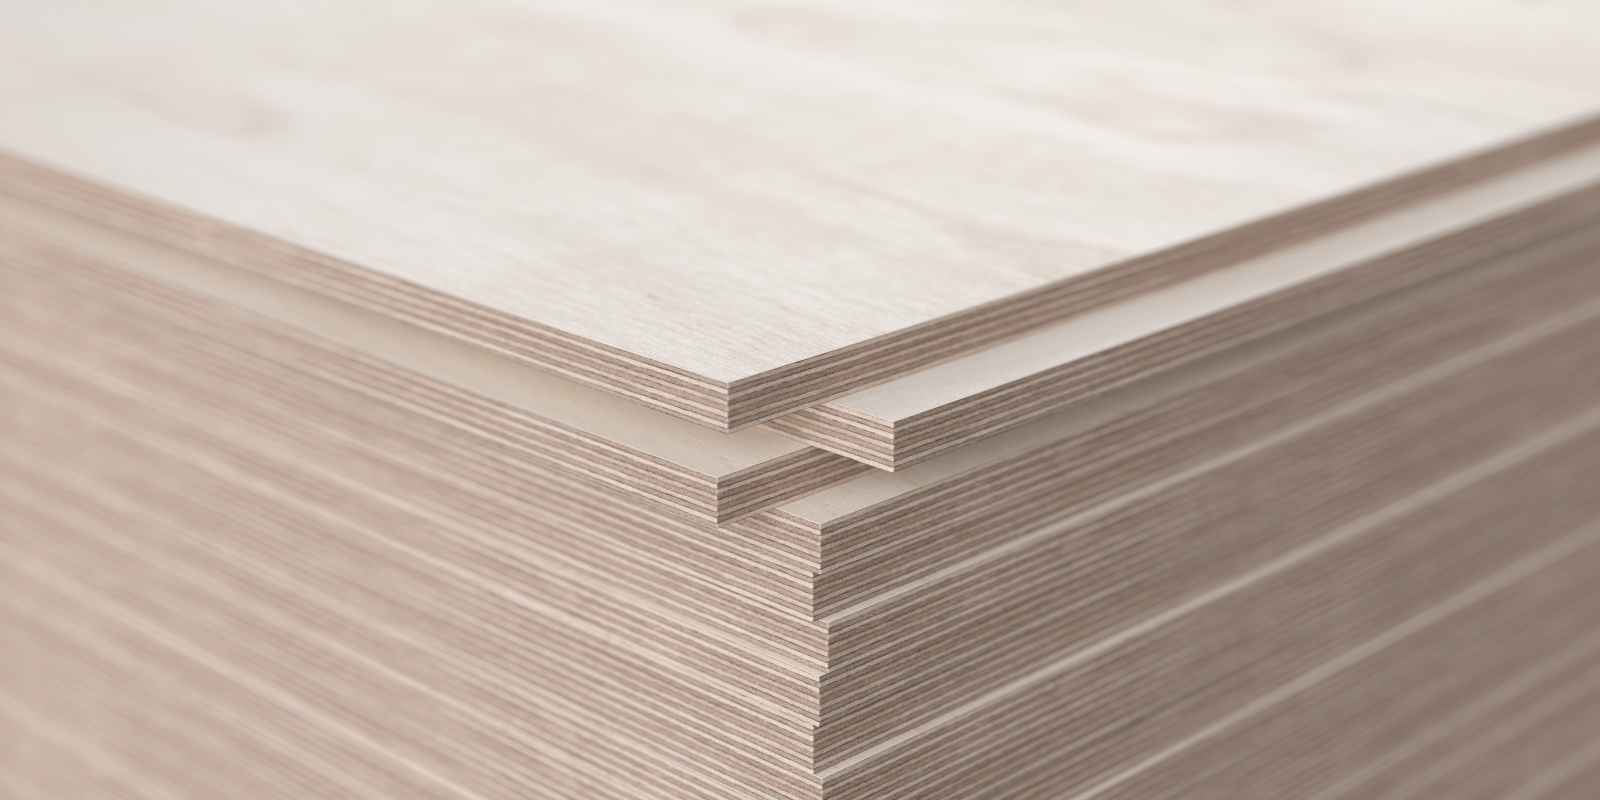  Acx Exterior Plywood for Small Space